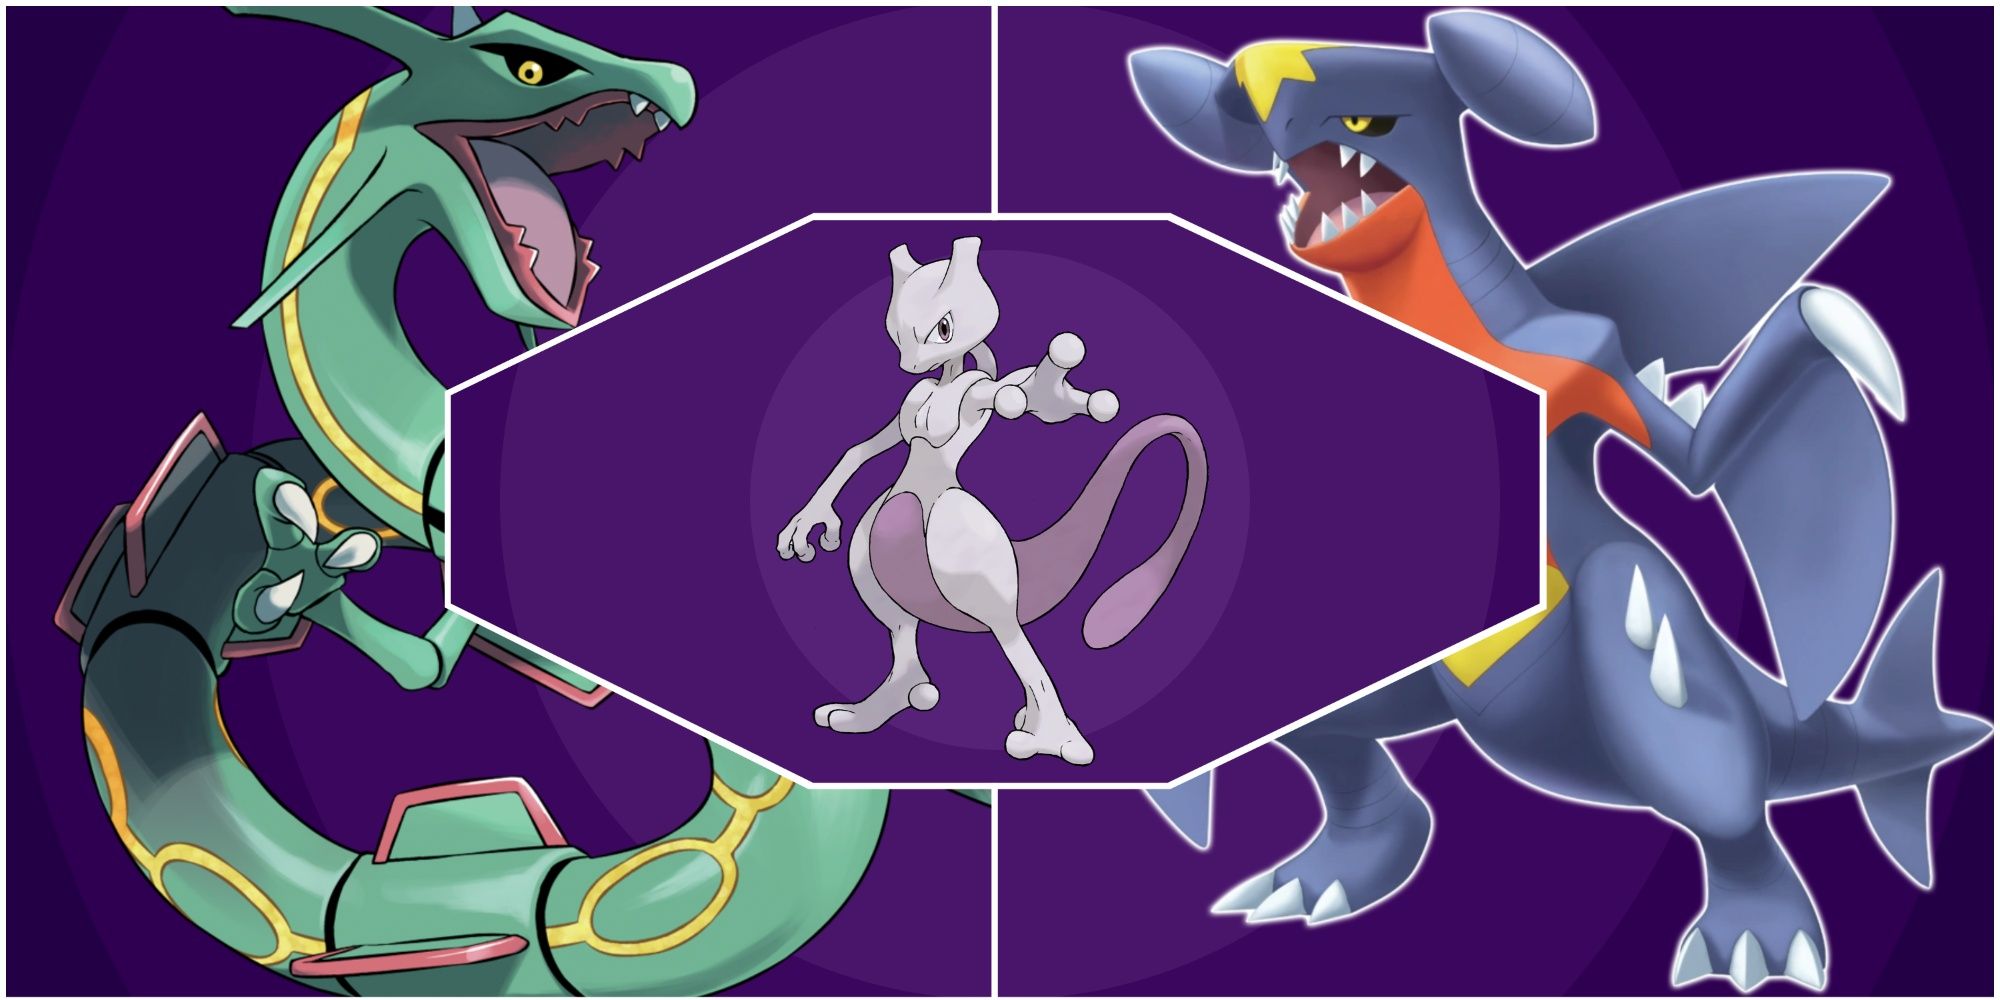 Mewtwo, Rayquaza, and Garchomp in a collage